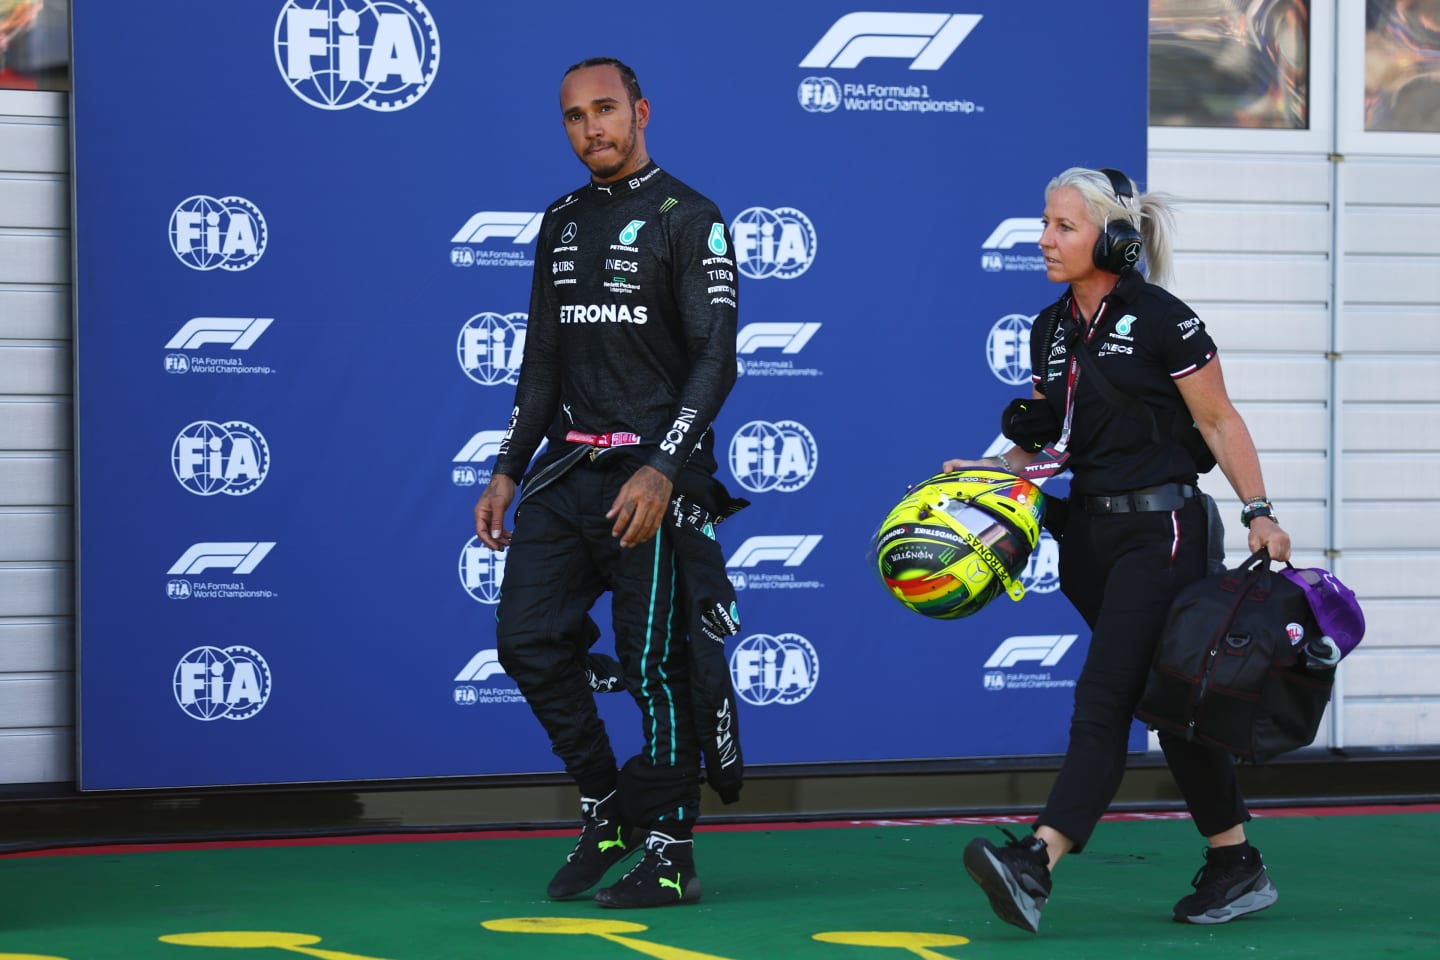 SPIELBERG, AUSTRIA - JULY 08: Lewis Hamilton of Great Britain and Mercedes walks in the Pitlane after a crash during qualifying ahead of the F1 Grand Prix of Austria at Red Bull Ring on July 08, 2022 in Spielberg, Austria. (Photo by Lars Baron - Formula 1/Formula 1 via Getty Images)